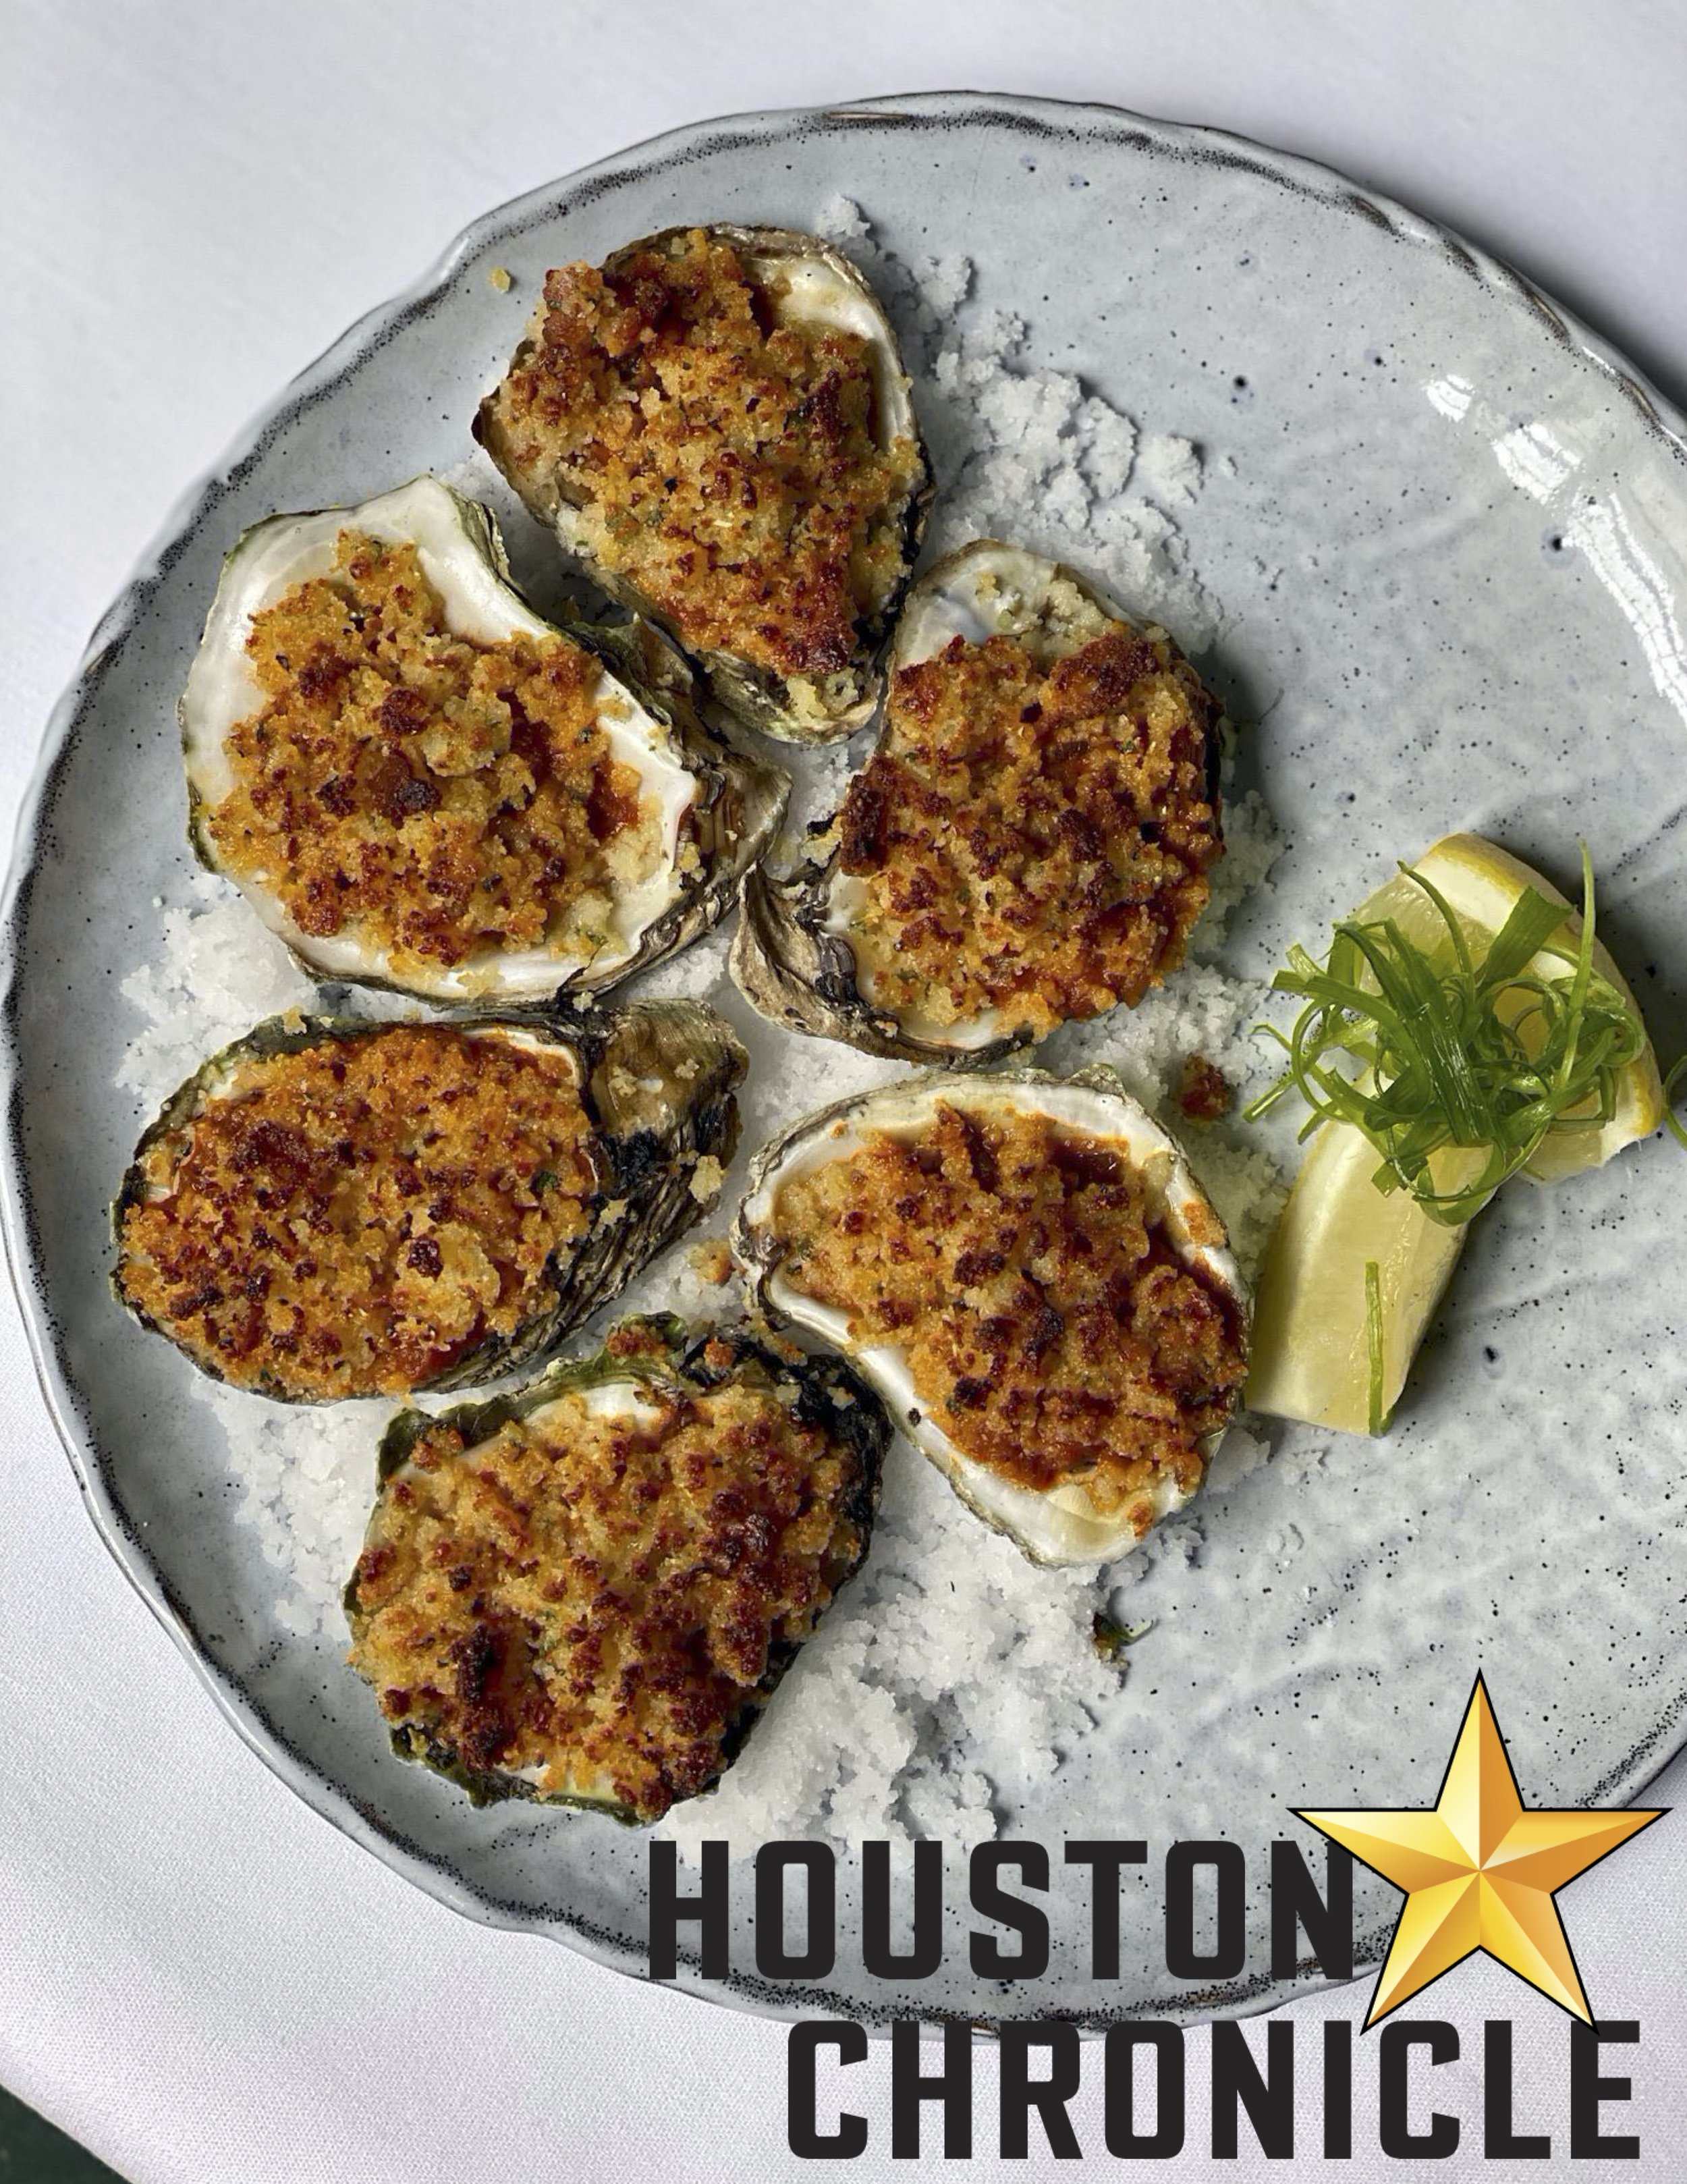 HoustonChronicle_Oysters.jpg